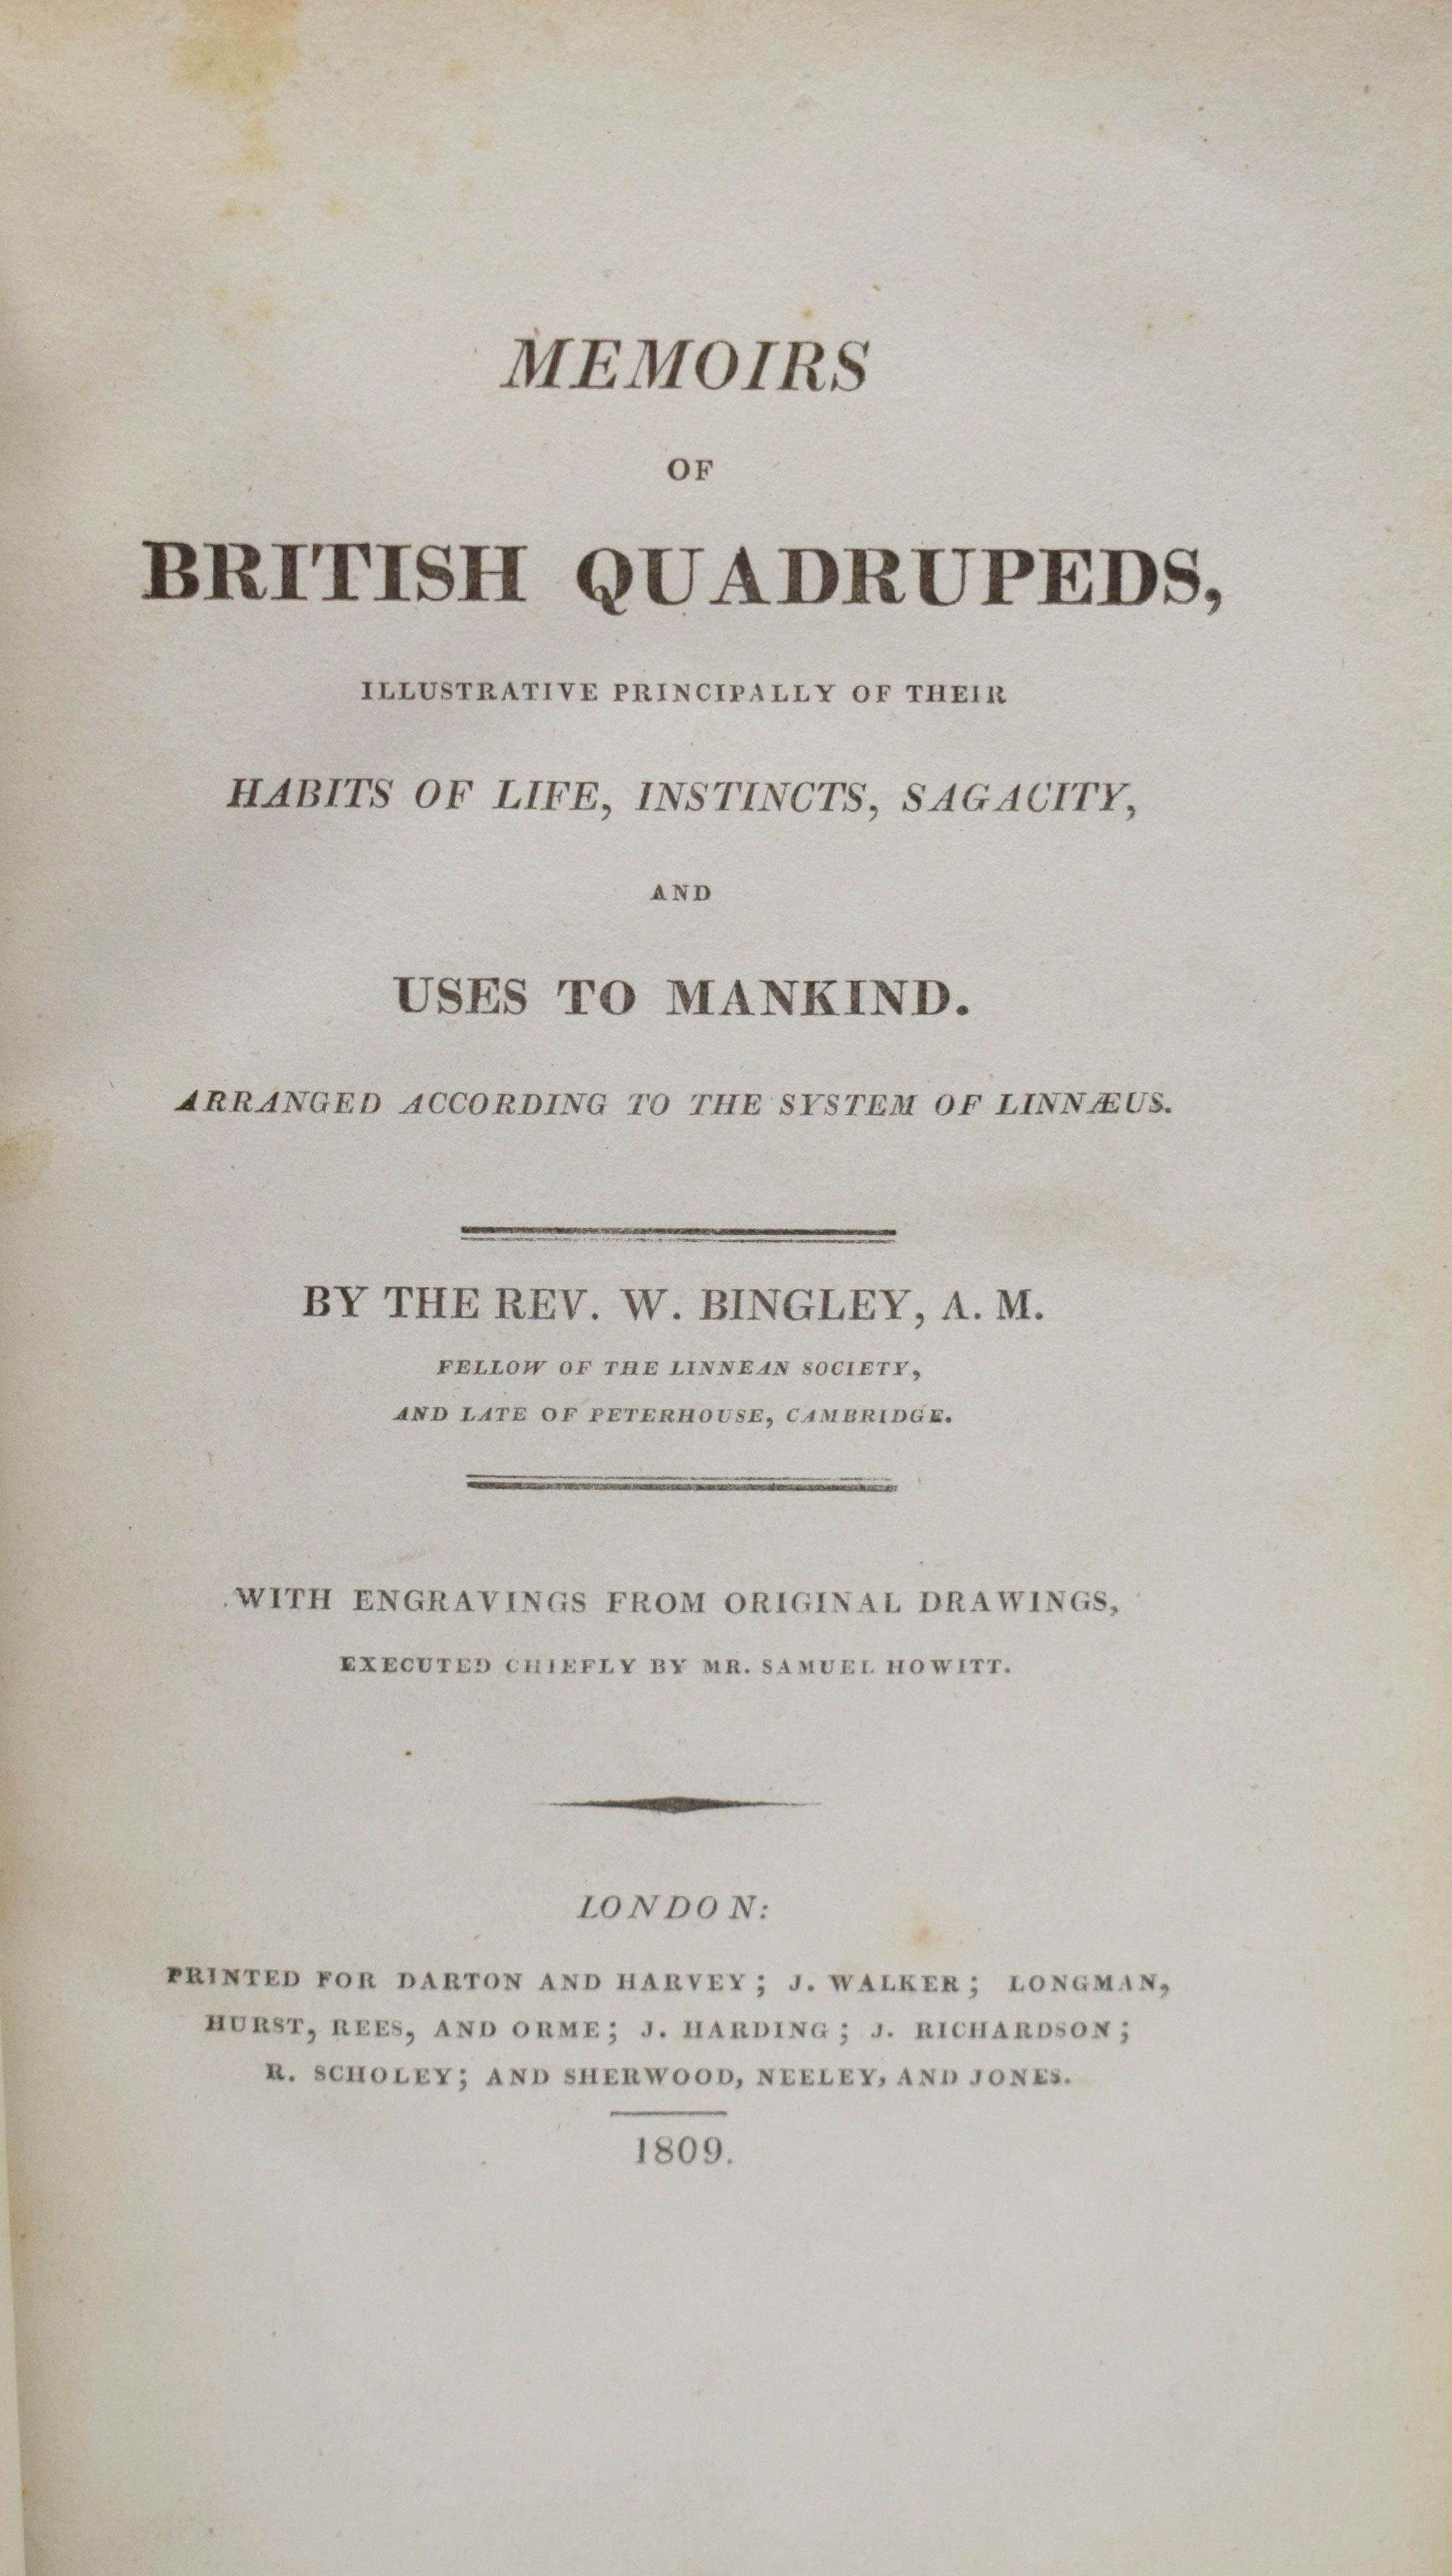 Memoirs of British Quadrupeds, Illustrative Principally of Their Habits of Life, Instincts, Sagacity, and Uses to Mankind